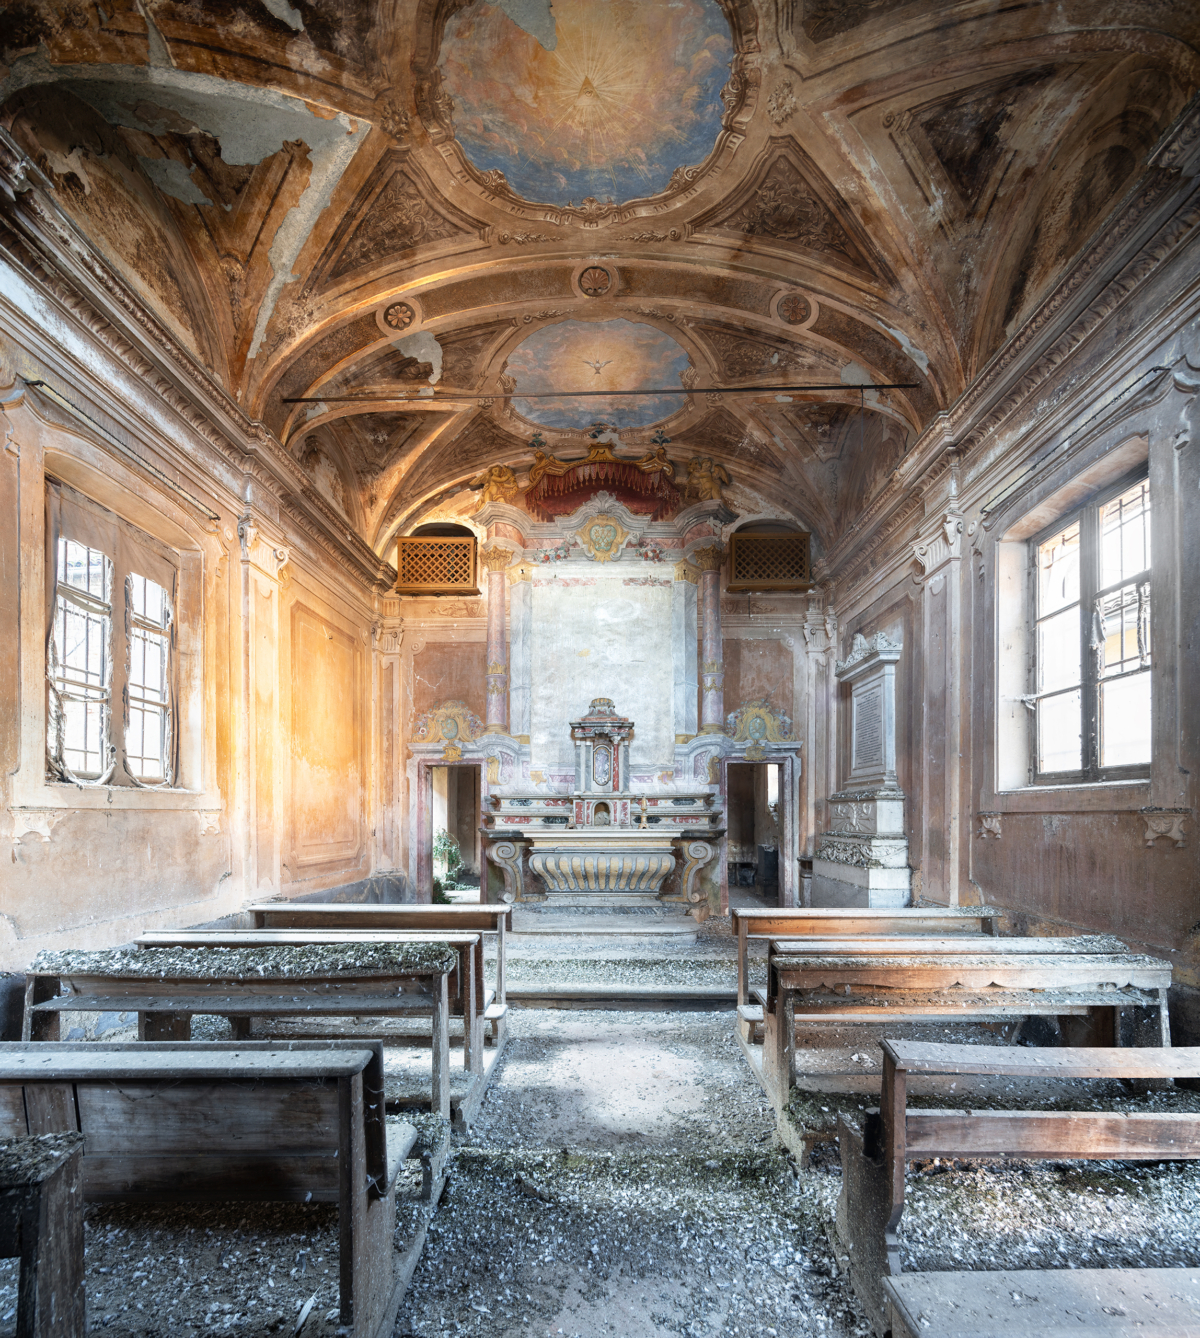 Abandoned church inside an old palace in Italy